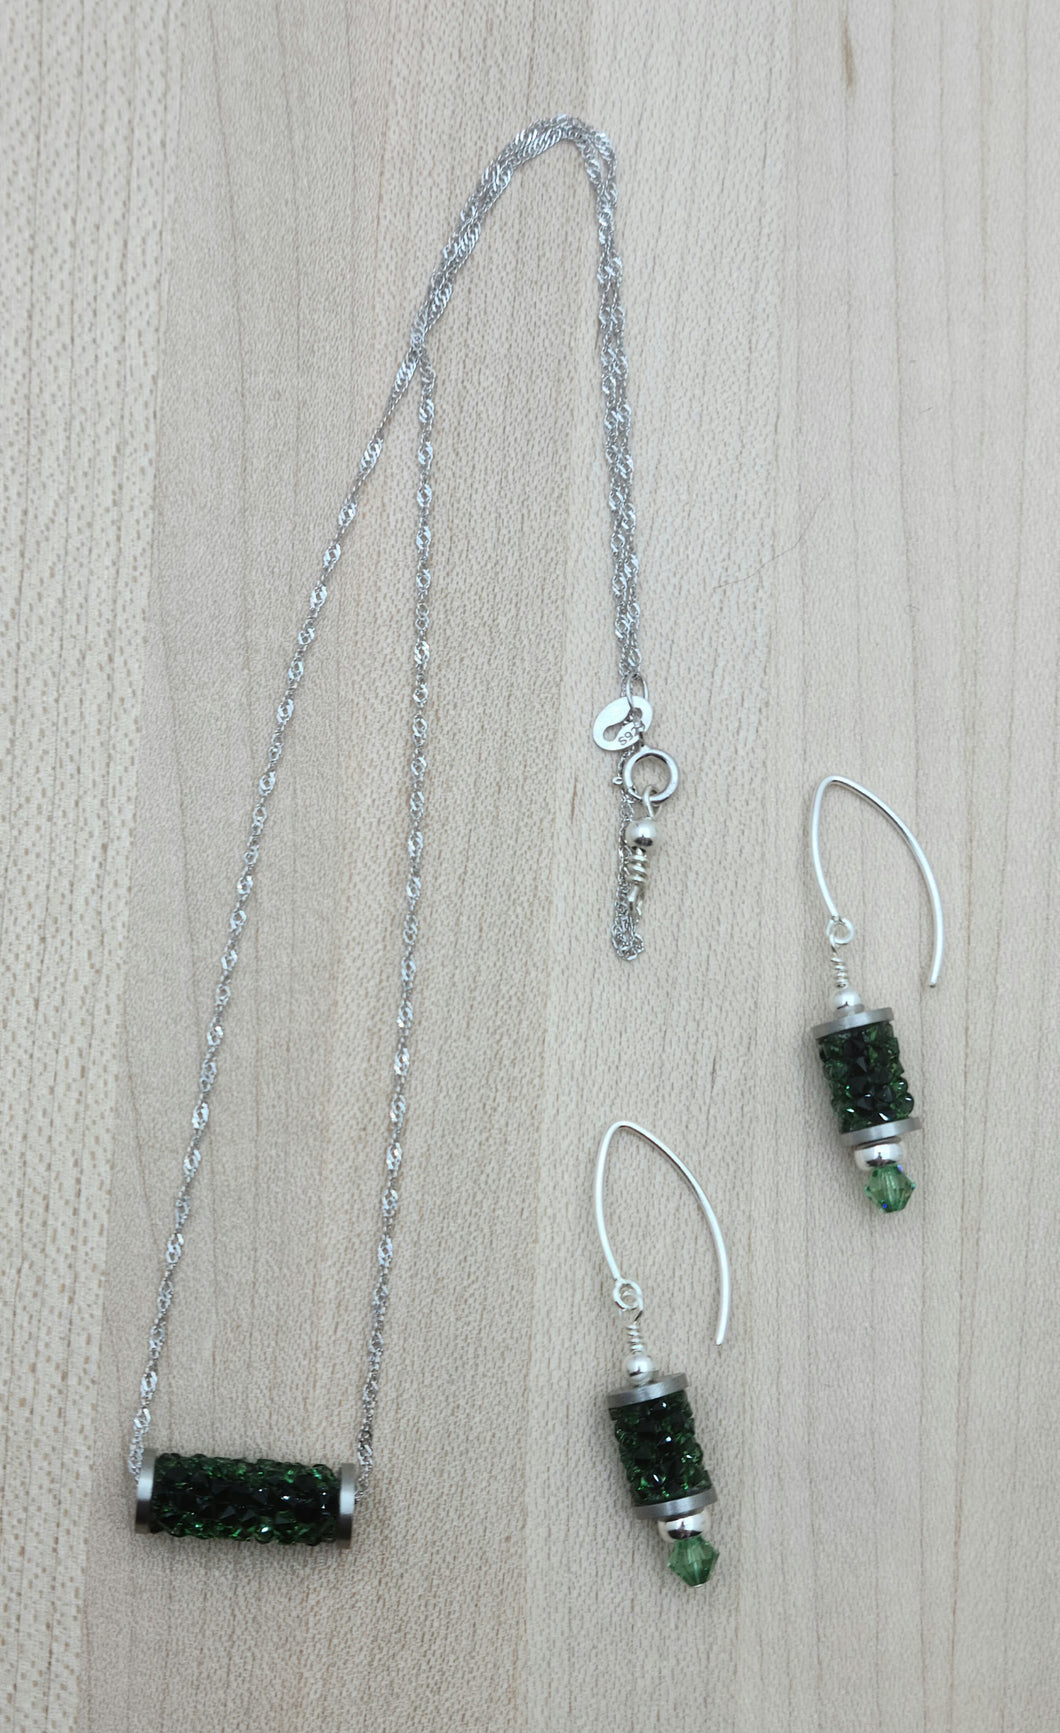 So simple, yet eye catching! The focal is a tube comprised of erinite green crystal 'rocks' on a sterling silver chain. & fish hooks